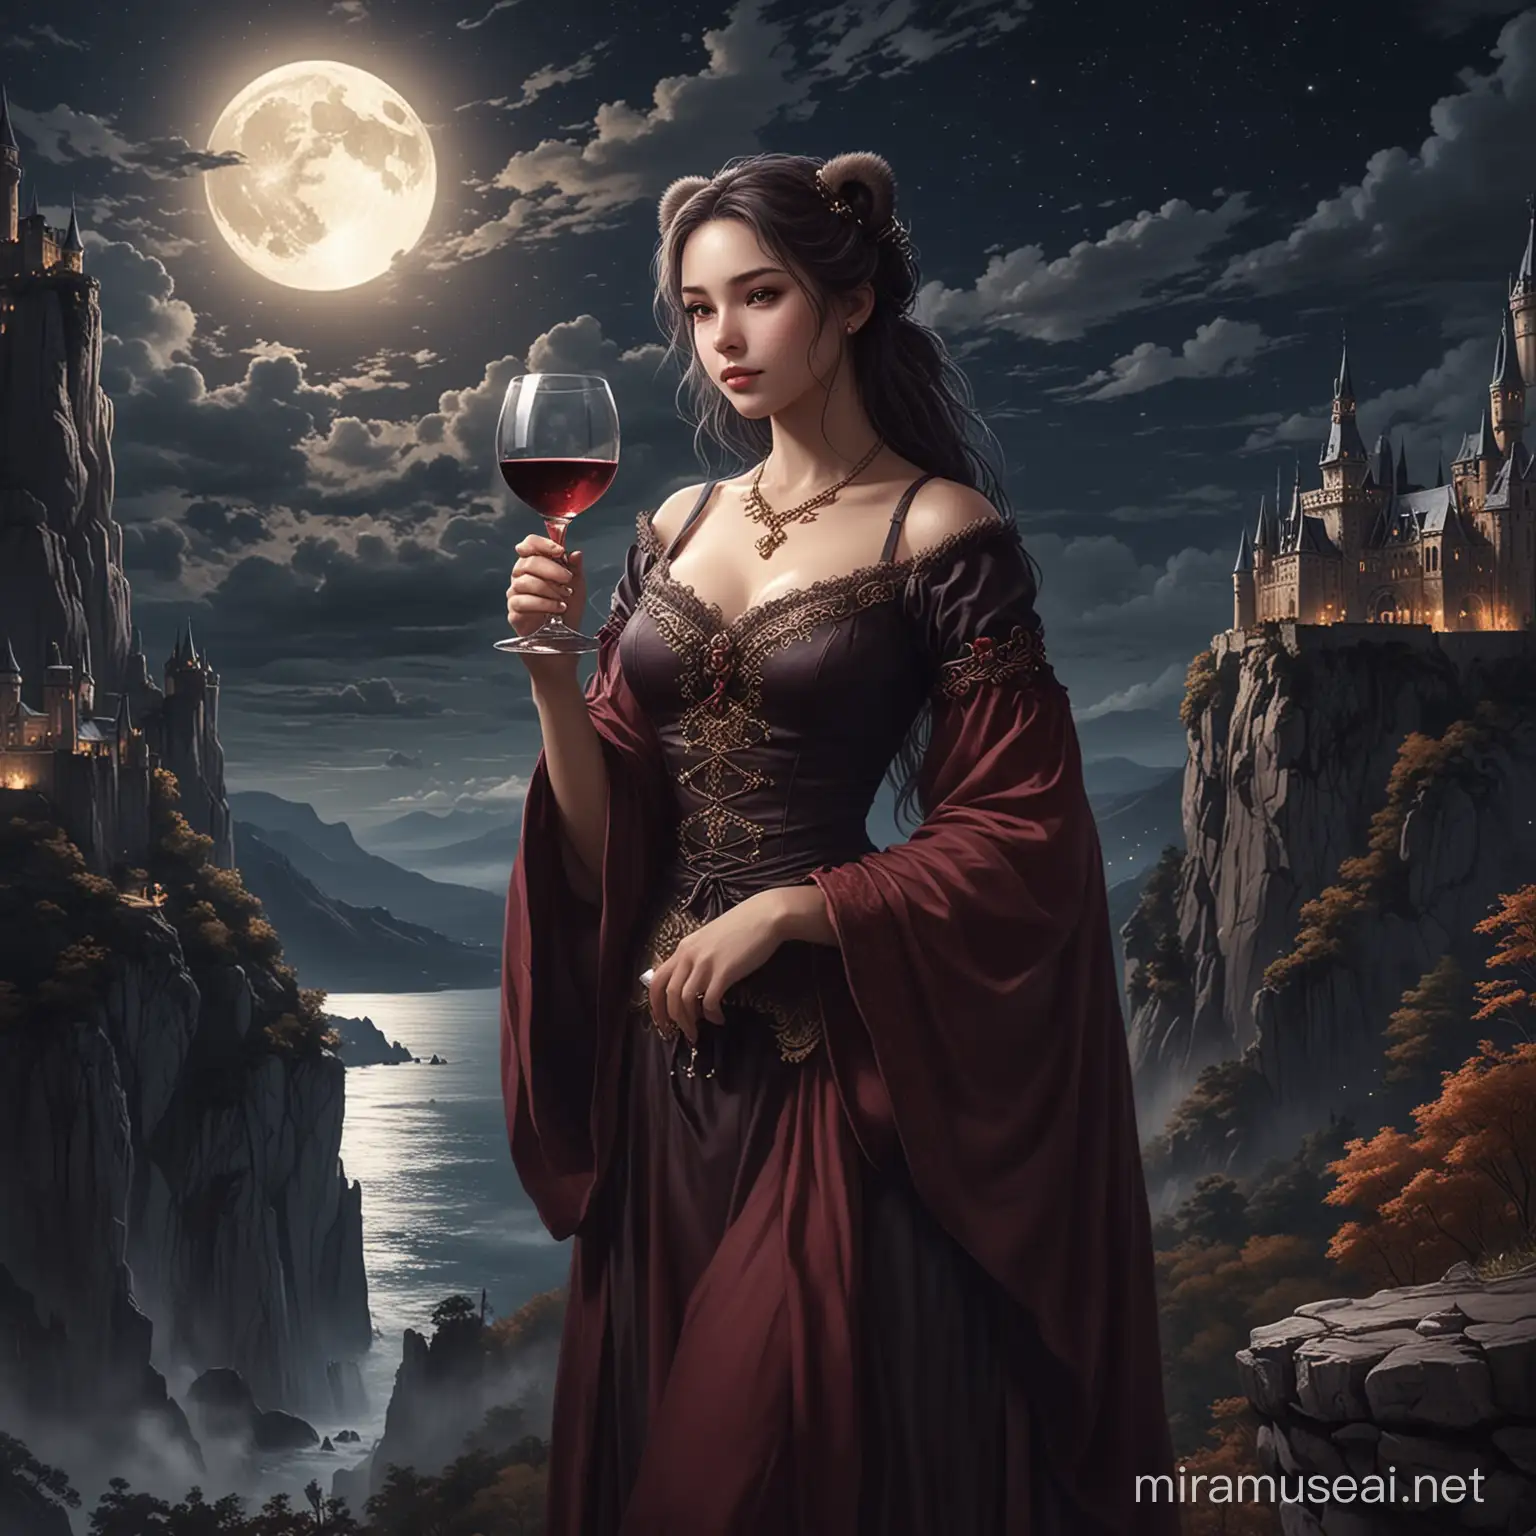 Artio THE BEAR GODDESS,The image appears to be a painting of a person wearing a garment with a bear.Vampire,The image is of a woman holding a glass of wine. The woman's appearance is described as having elements of anime, CG artwork, and gothic subculture.The image is a digital composite featuring a castle perched on a cliff under a night sky with a prominent moon. It has an anime style and depicts an outdoor setting.